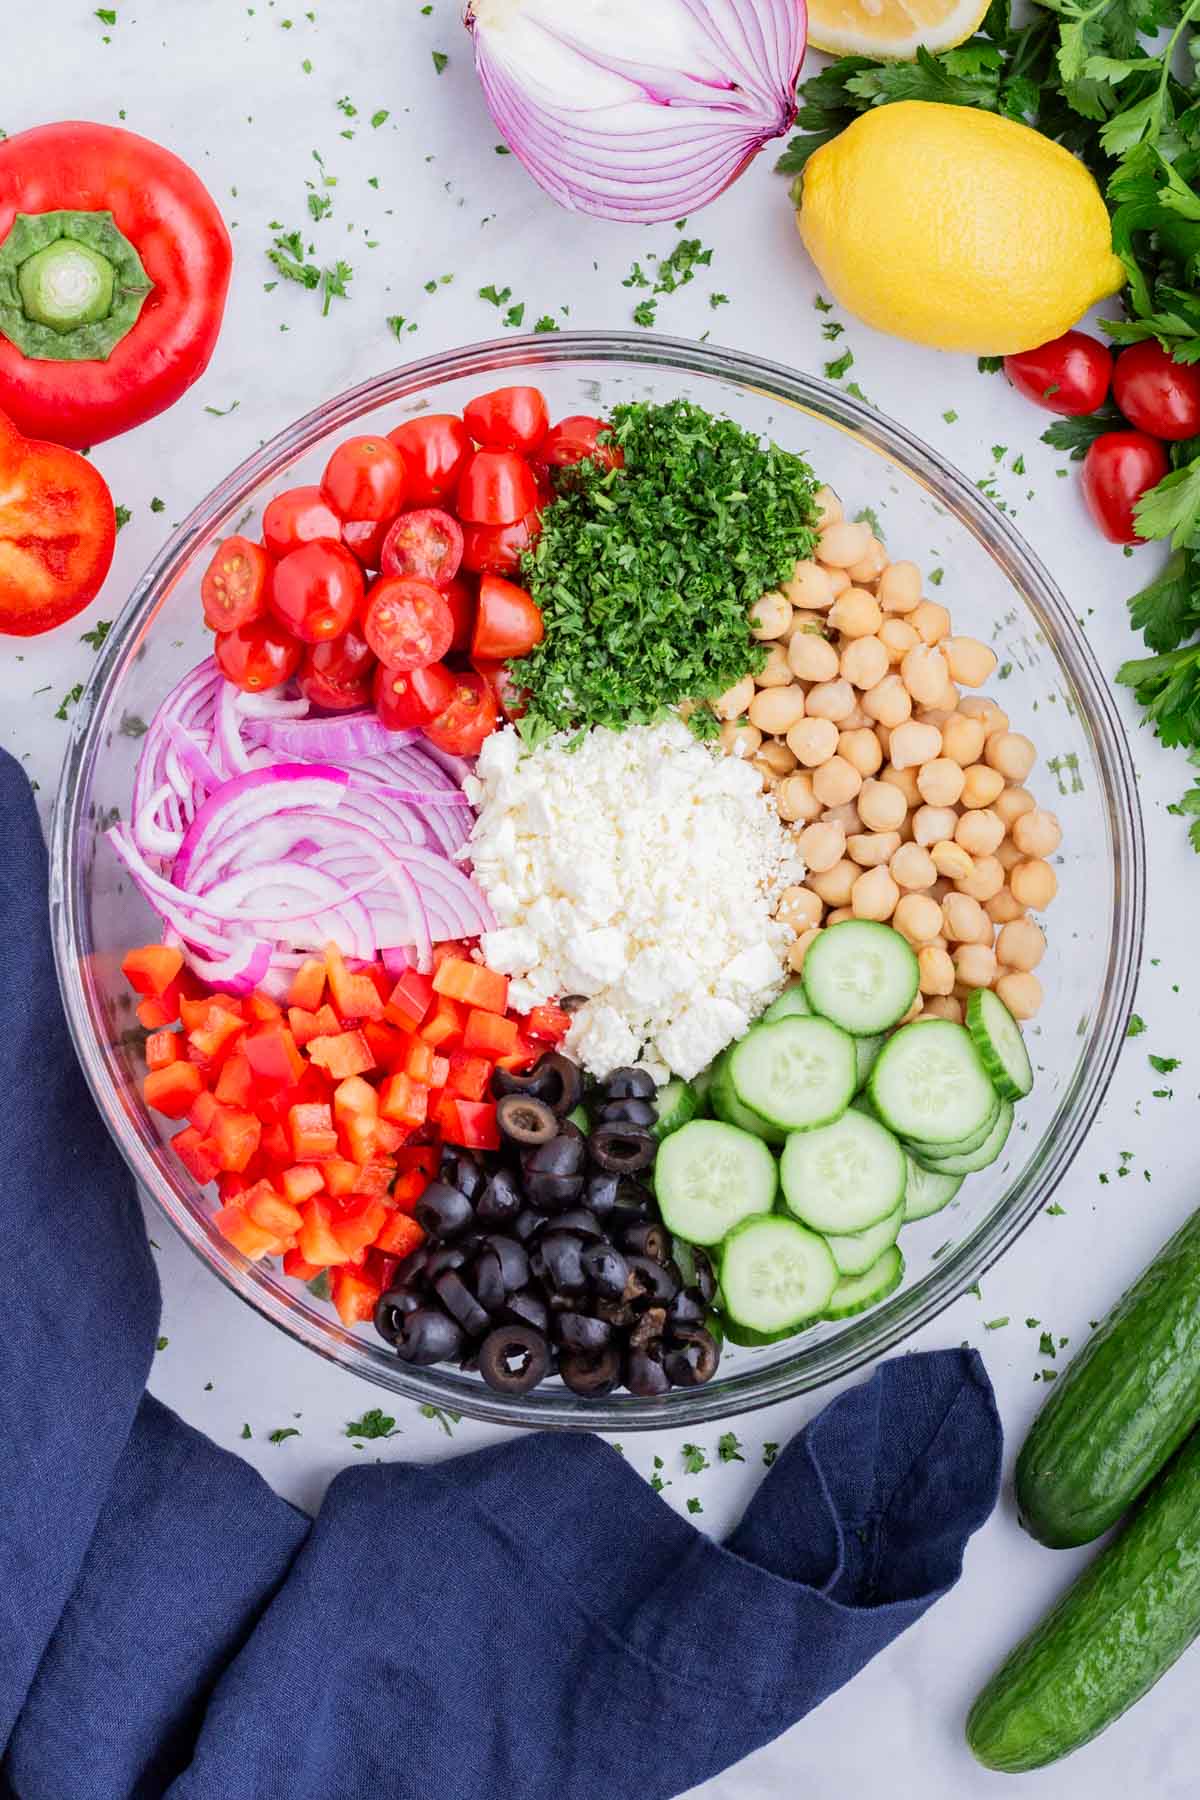 The salad ingredients are added to a large bowl.